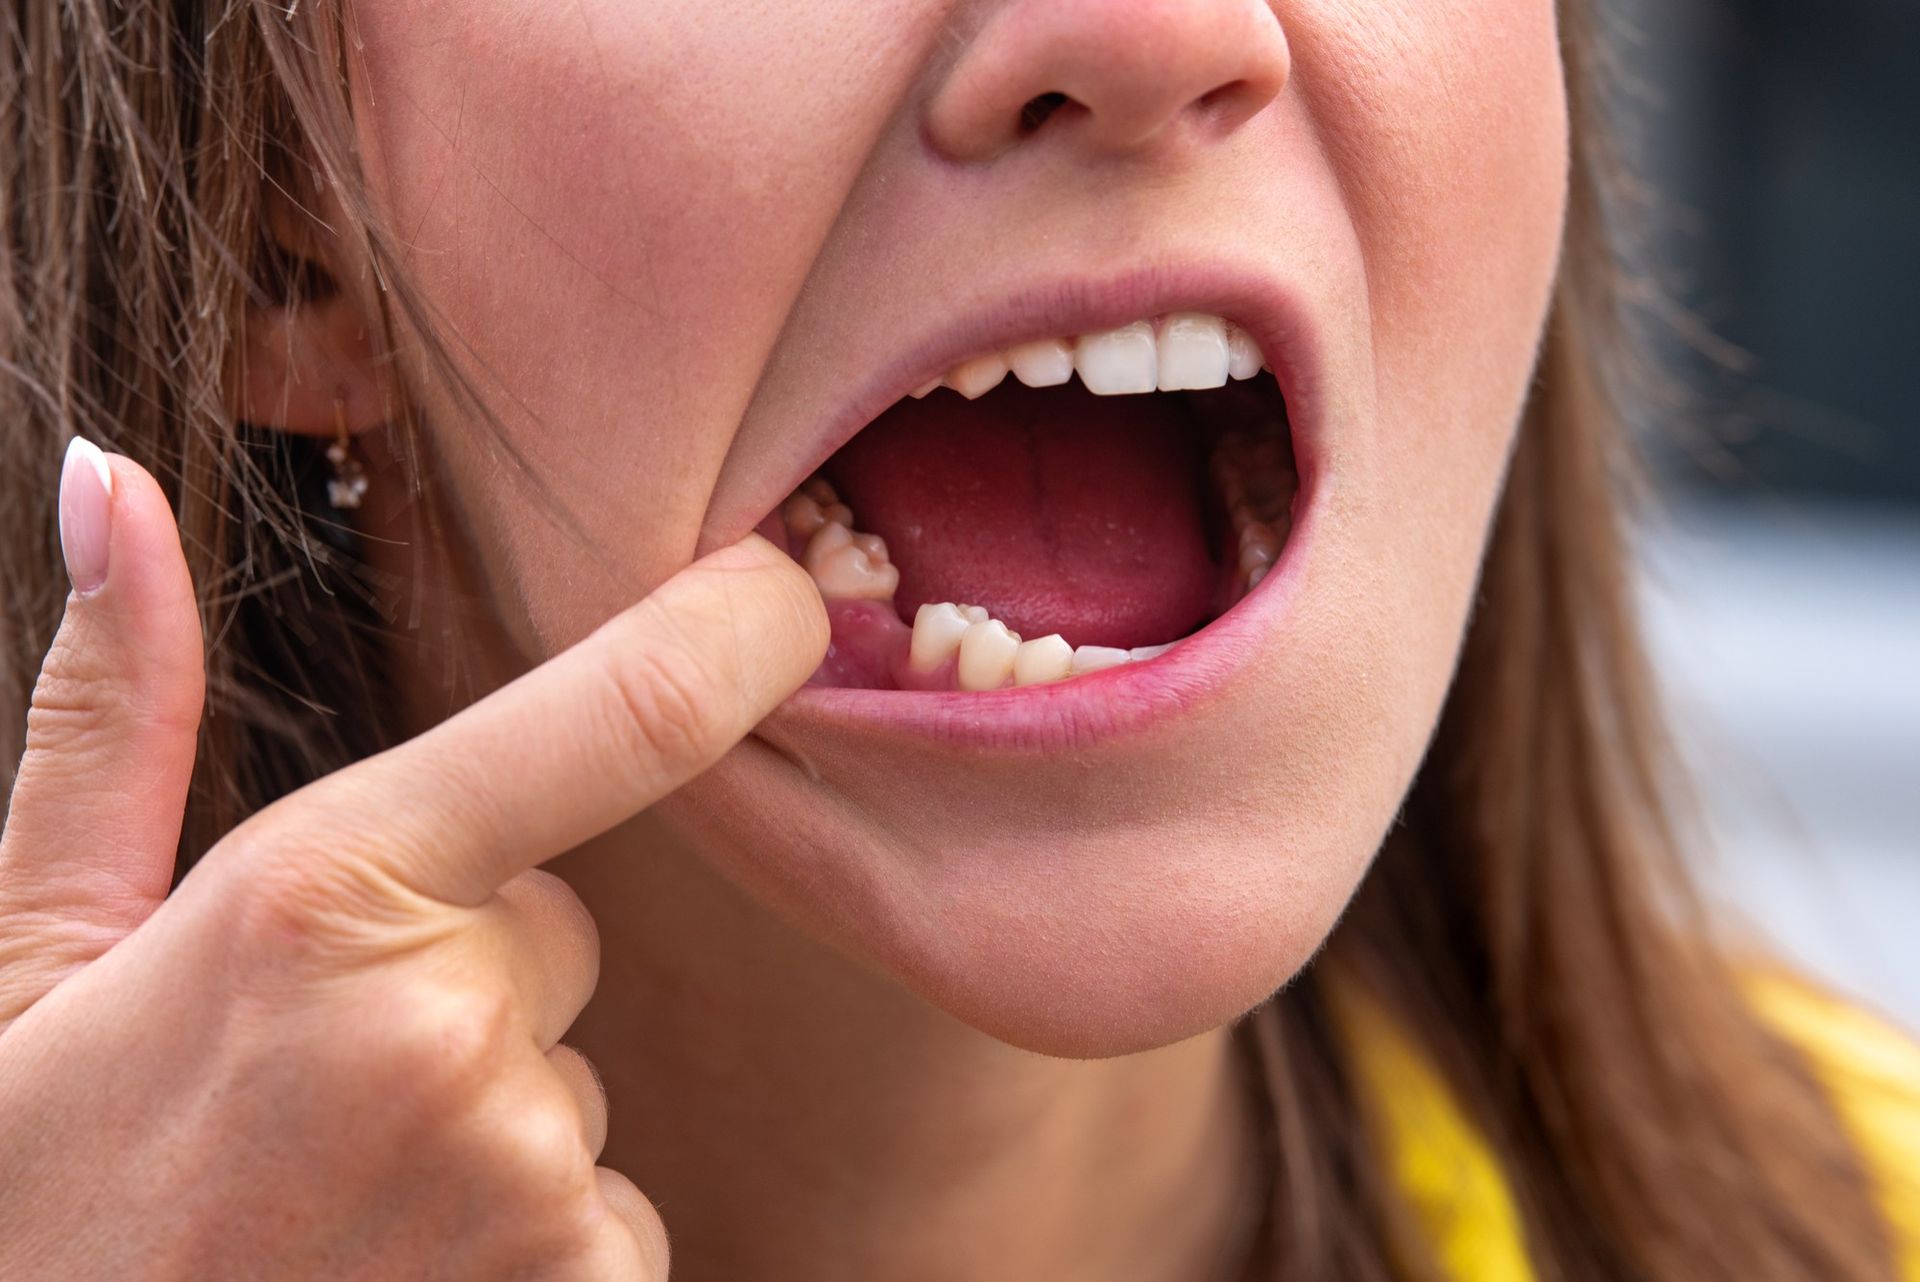 a woman is pointing at her missing tooth in her mouth .